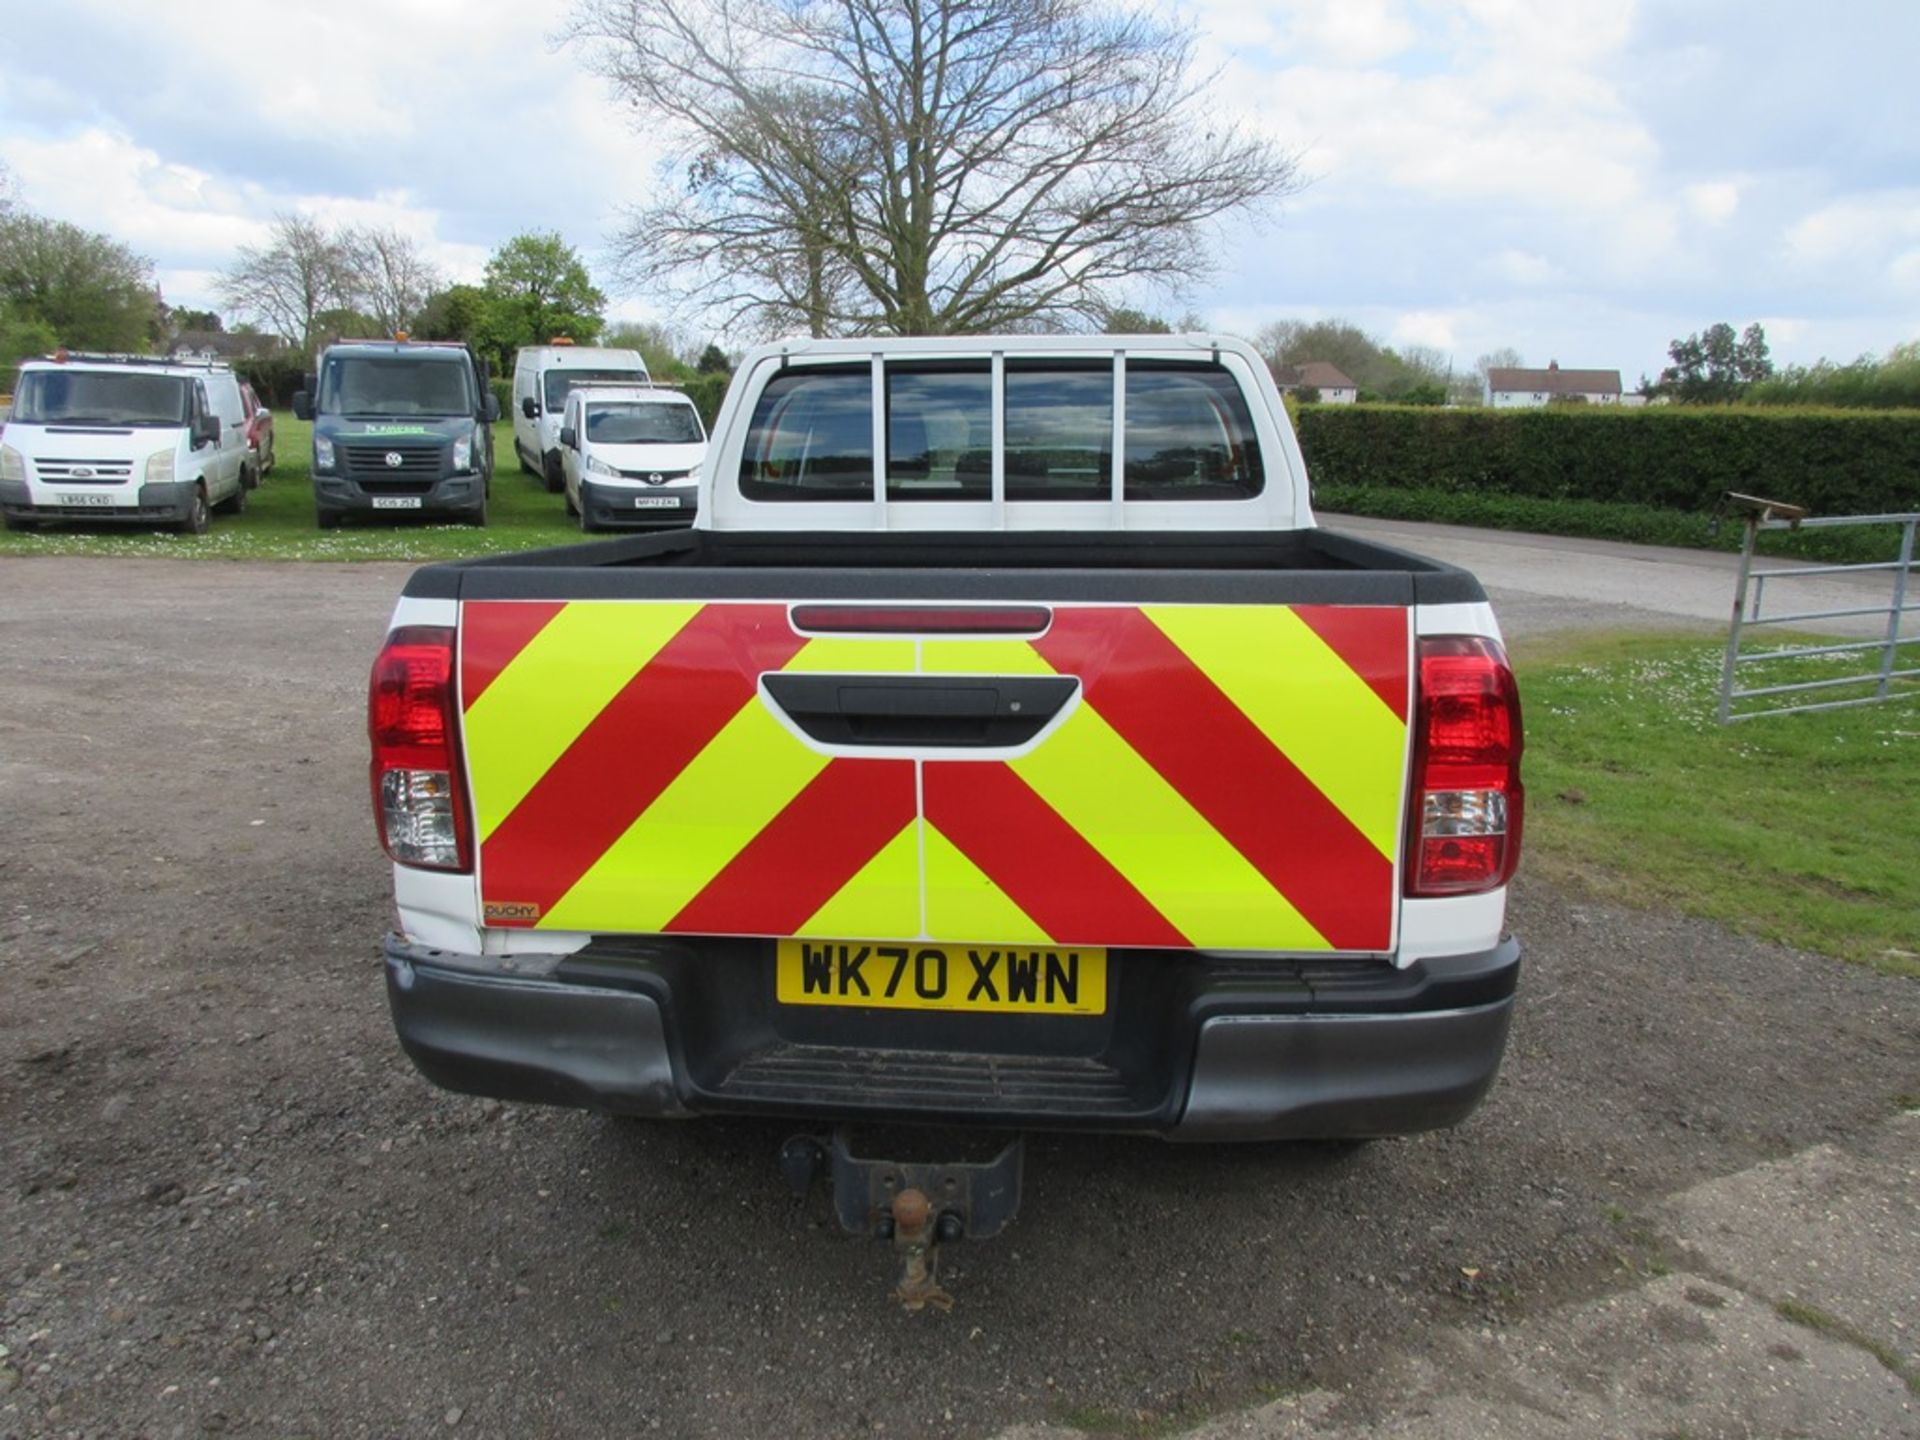 Toyota Hilux Active 2.4D-4D 4Wd Double Cab pickup, 147bhp (19/01/2021) - Image 6 of 18